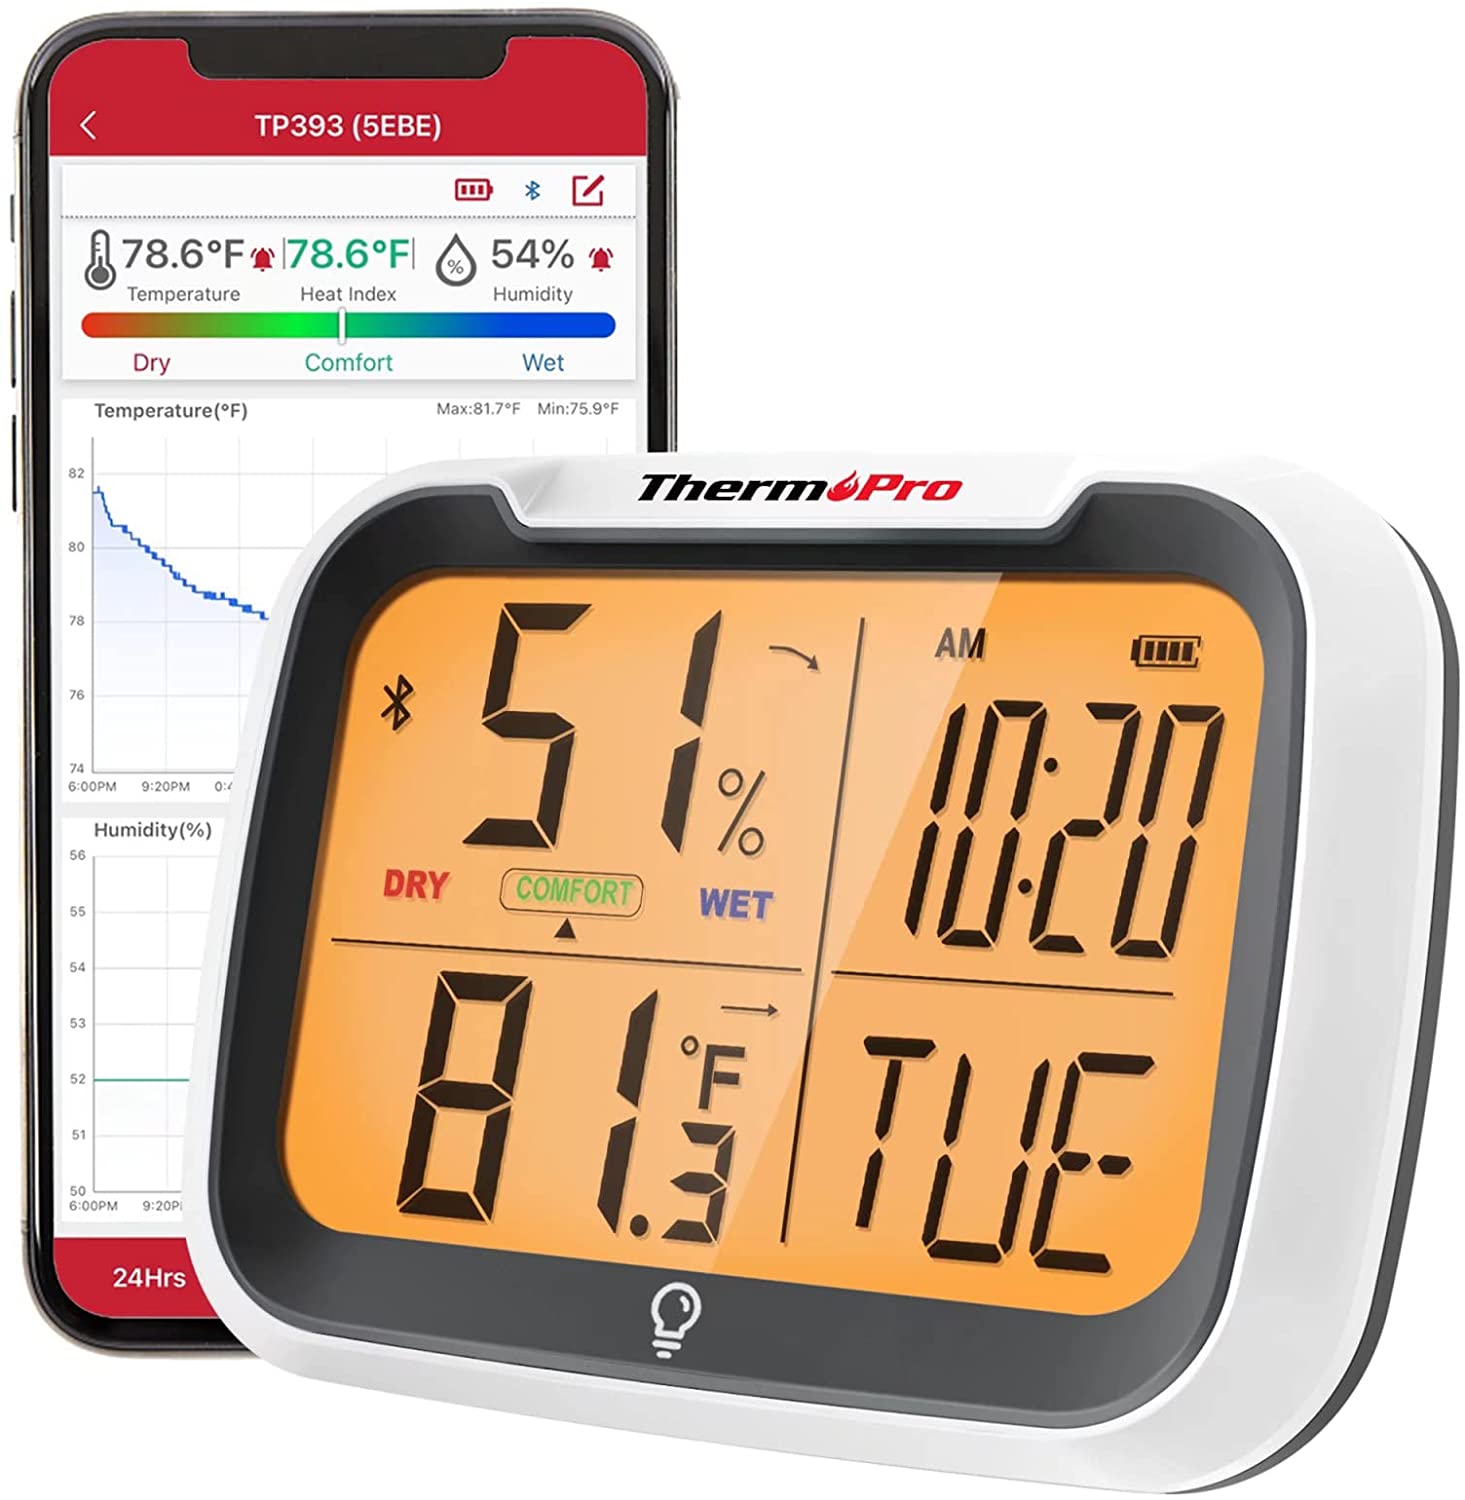 Overview of the Thermopro TP62 Indoor Outdoor Thermometer